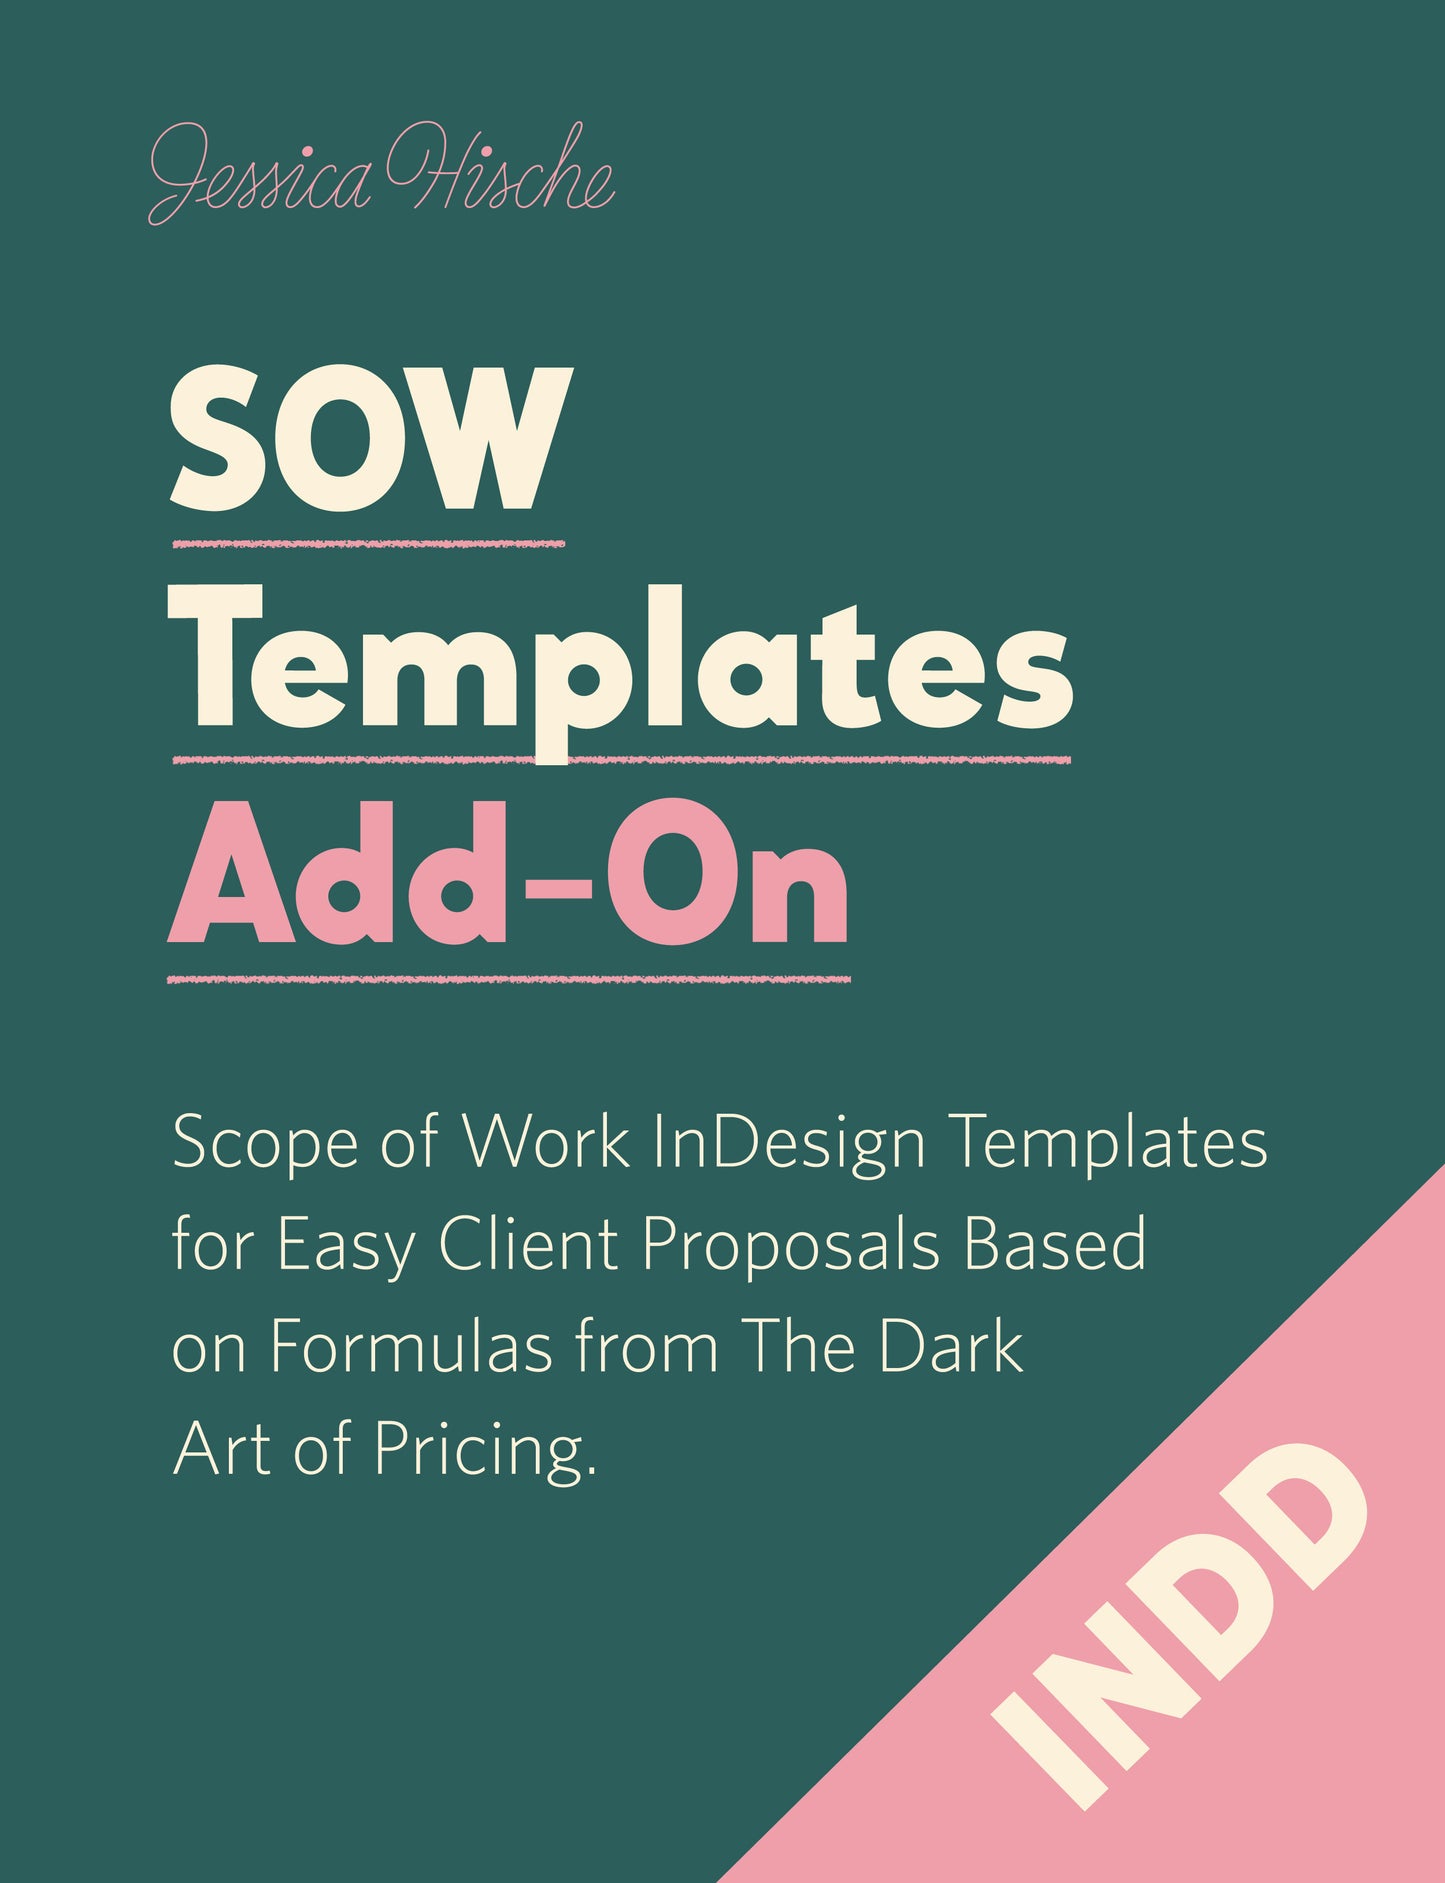 SOW Templates Add-On